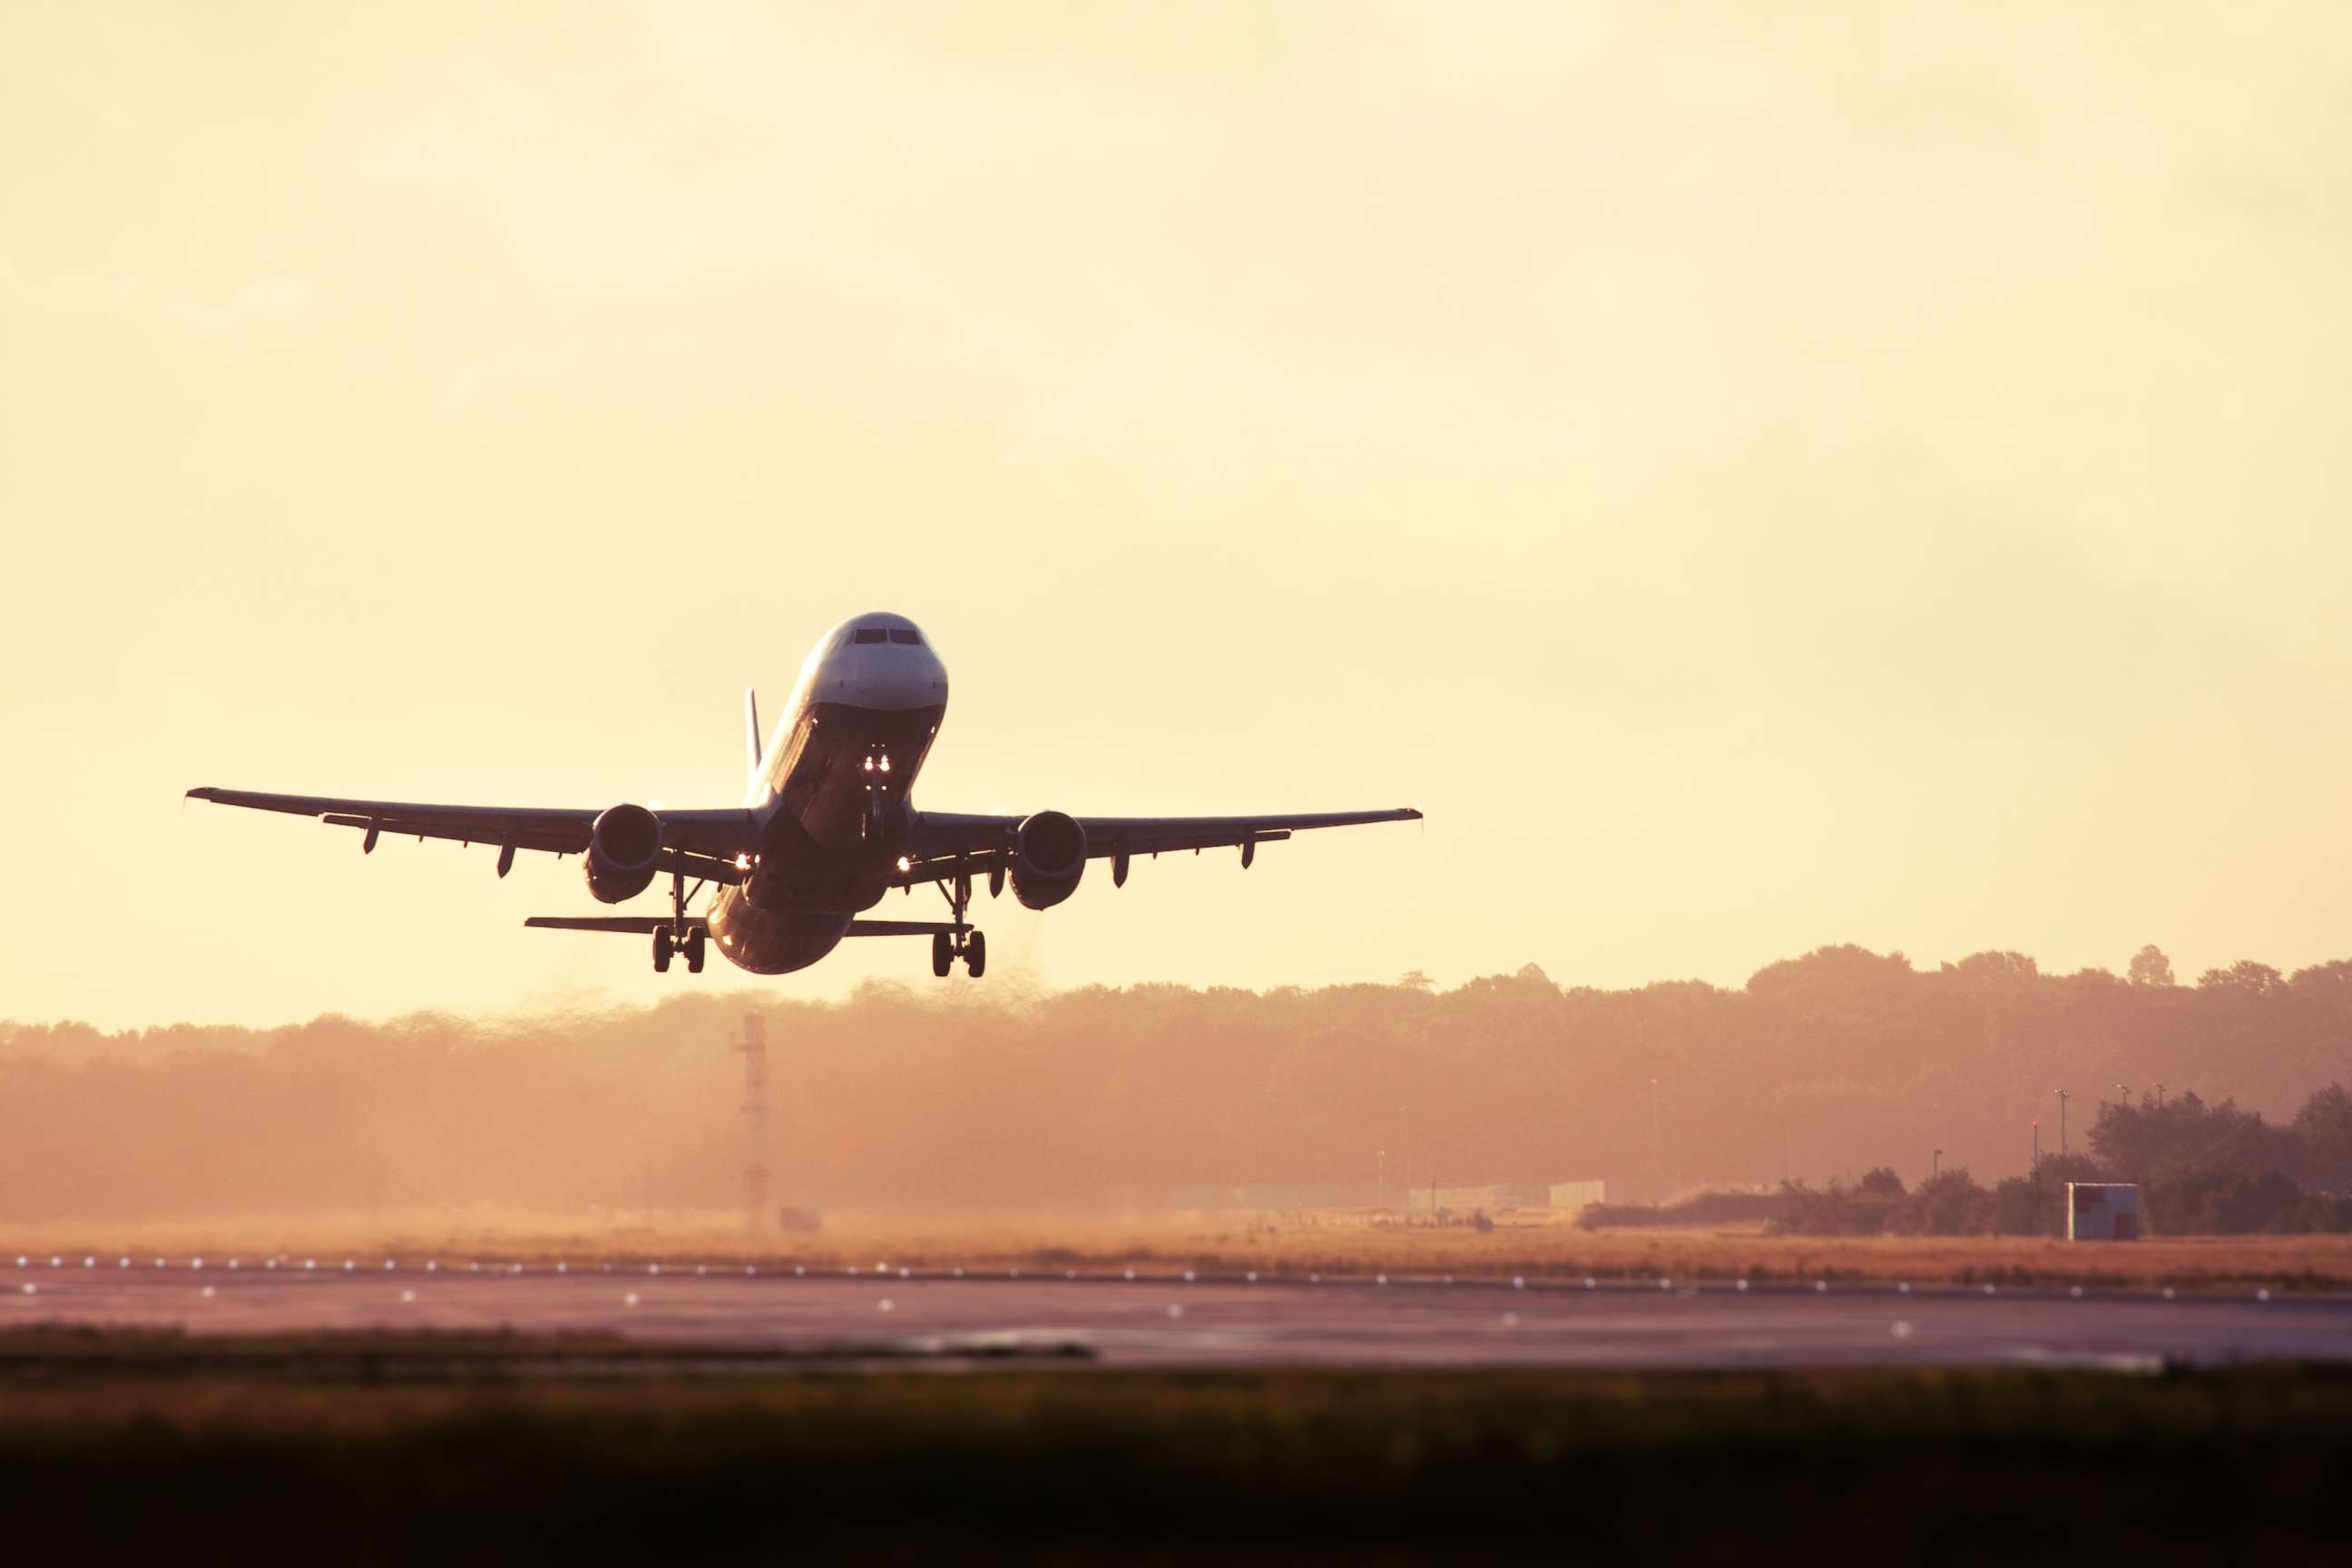 PHOTO: An airplane takes off from the runway in this undated stock photo.